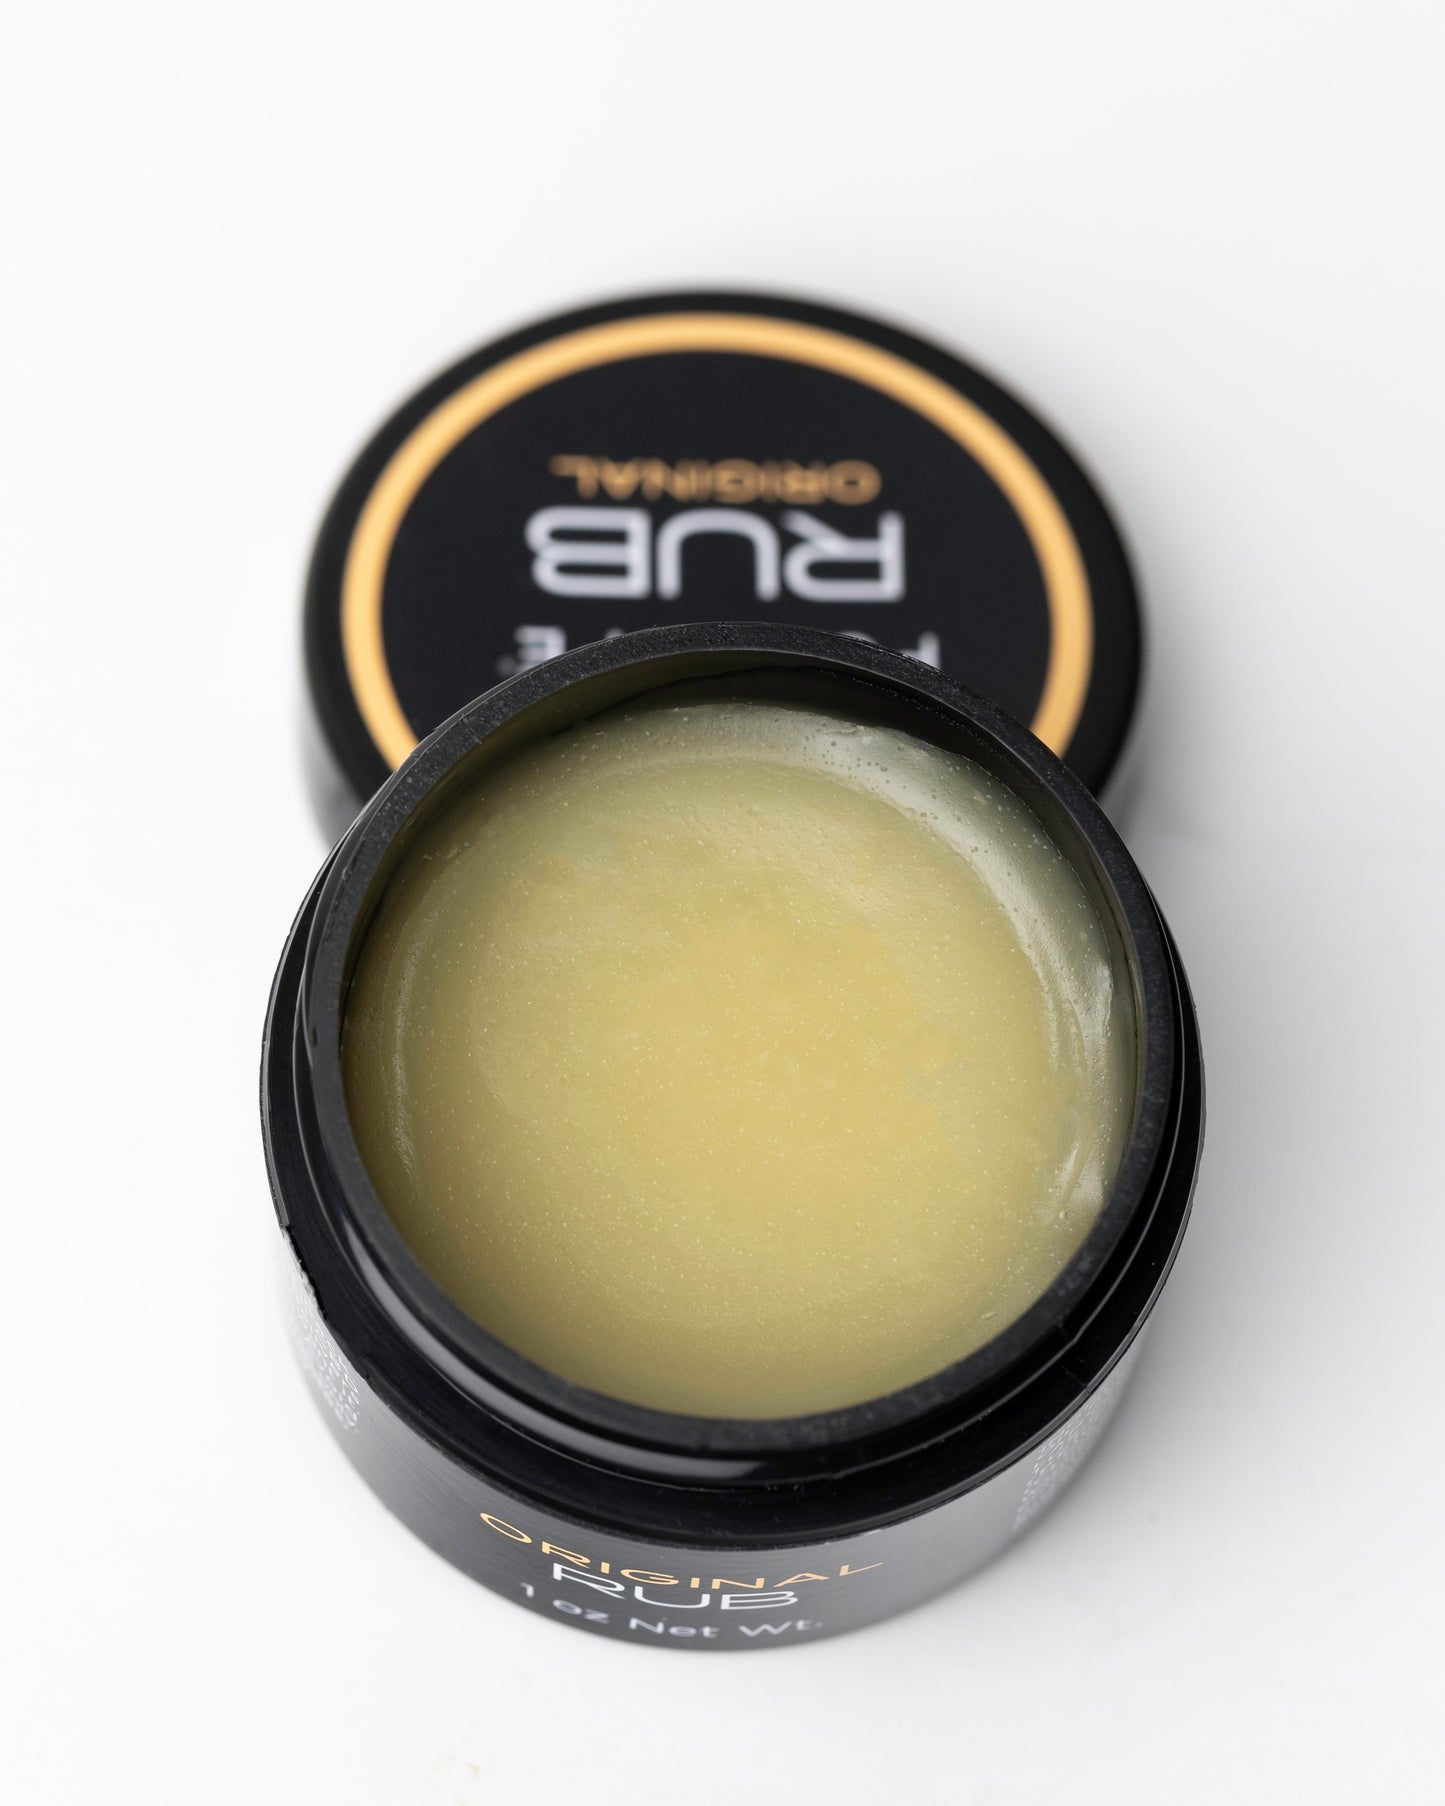 CBD muscle rub reduces inflammation causing deep muscle aches and pains in the body. CBD rub combines CBD with beeswax, camphor, cajuput oil, menthol, lanolin, cassia oil, eucalyptus oil, peppermint oil and clove oil for fast absorption and deep penetration into the body.